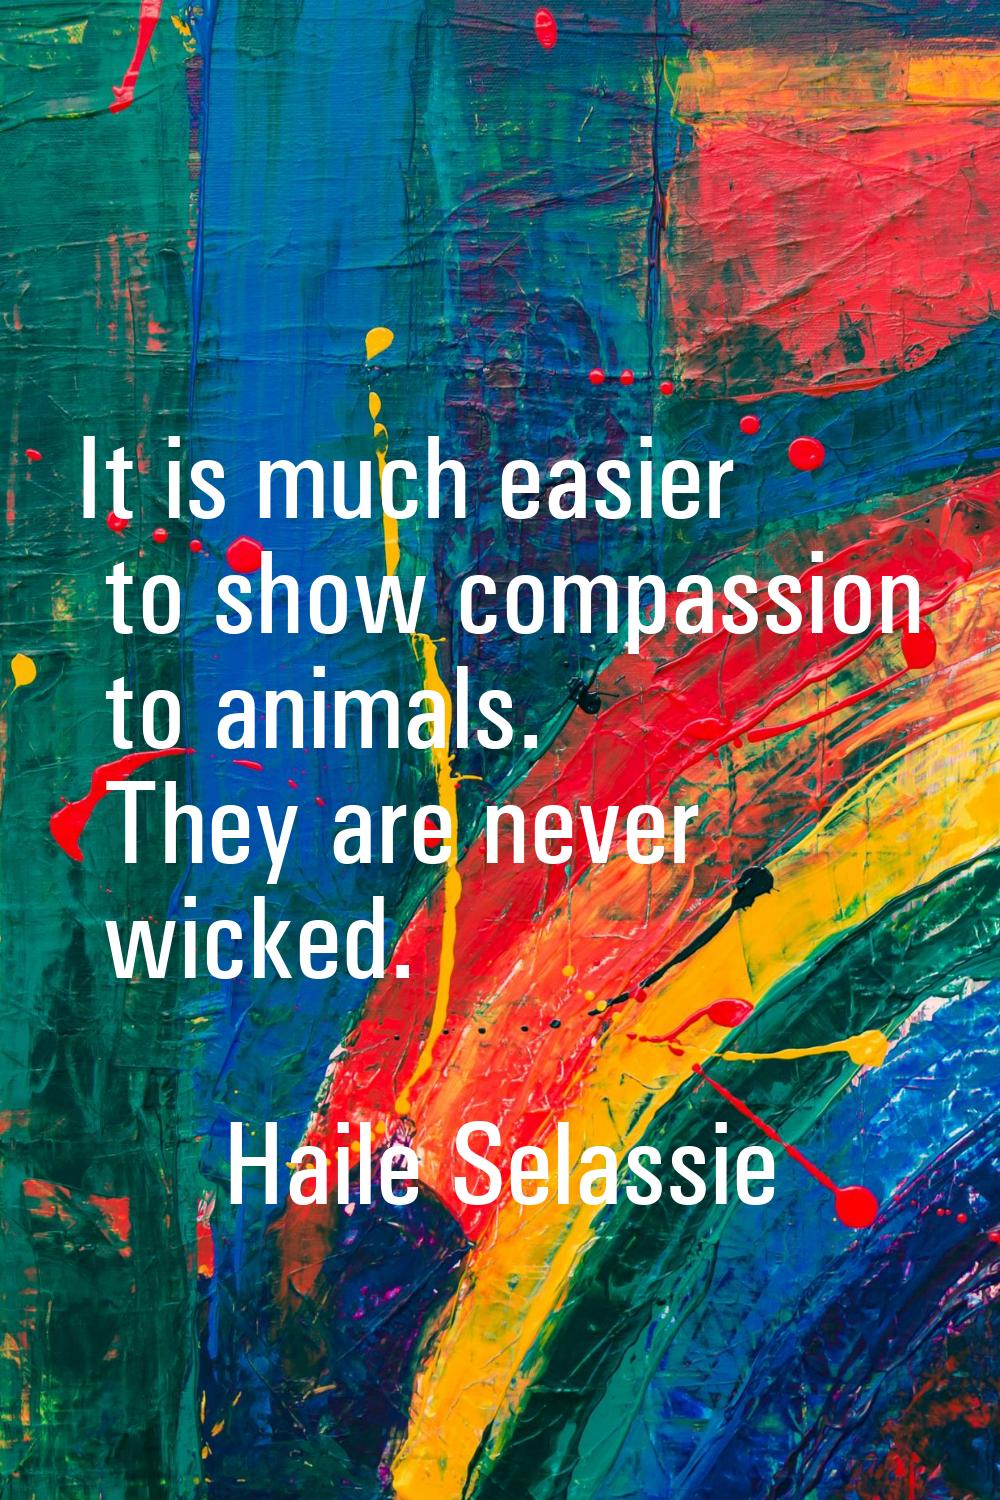 It is much easier to show compassion to animals. They are never wicked.